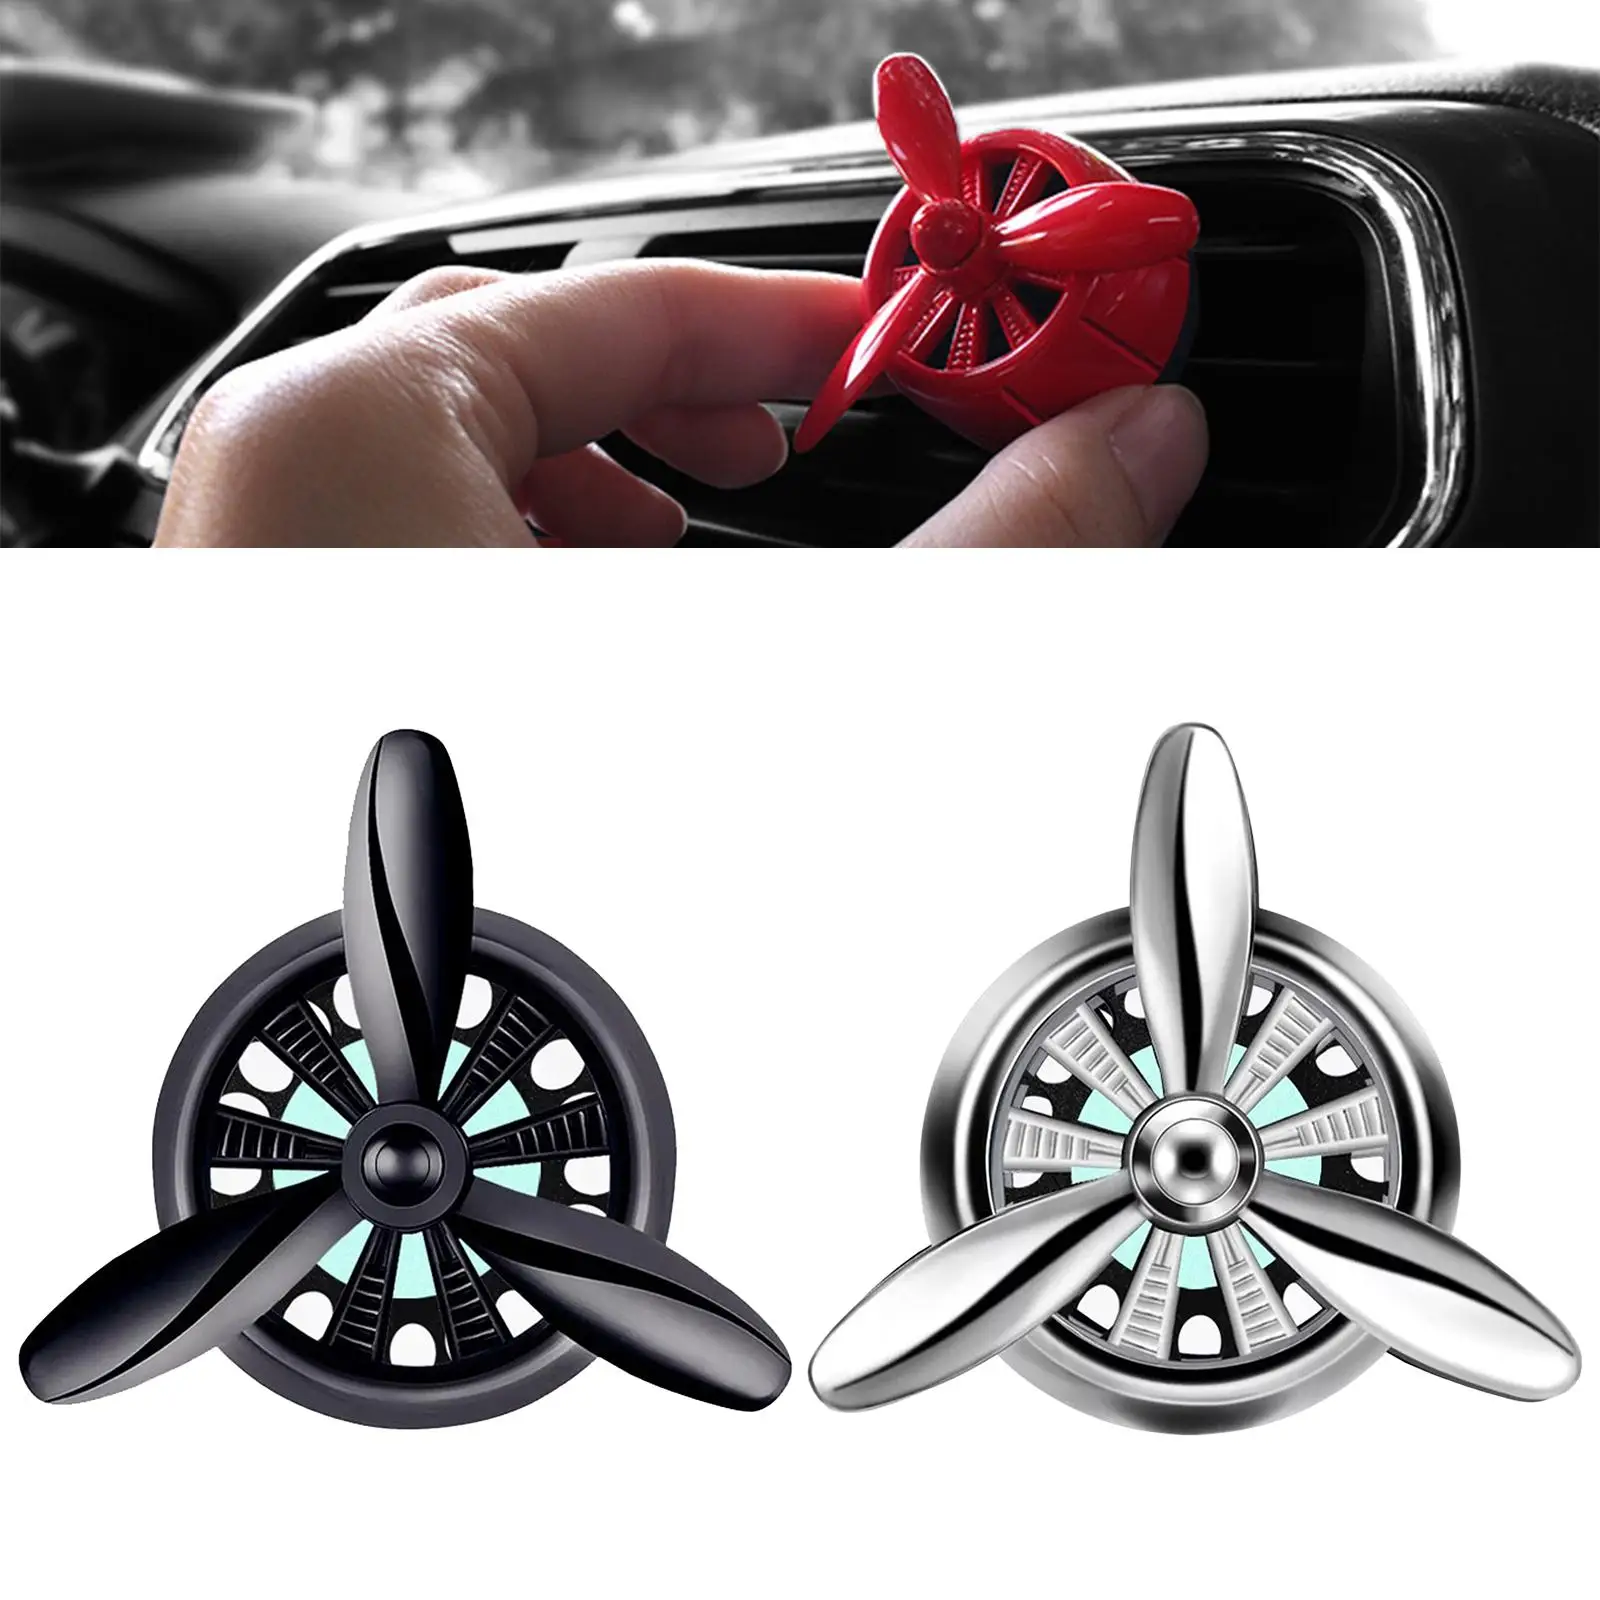 Car Air Freshener Vent Clip Propeller Vent Clip Fresh Aromatherapy Air Force Propeller Shape Car Essential Oil Diffuser Family